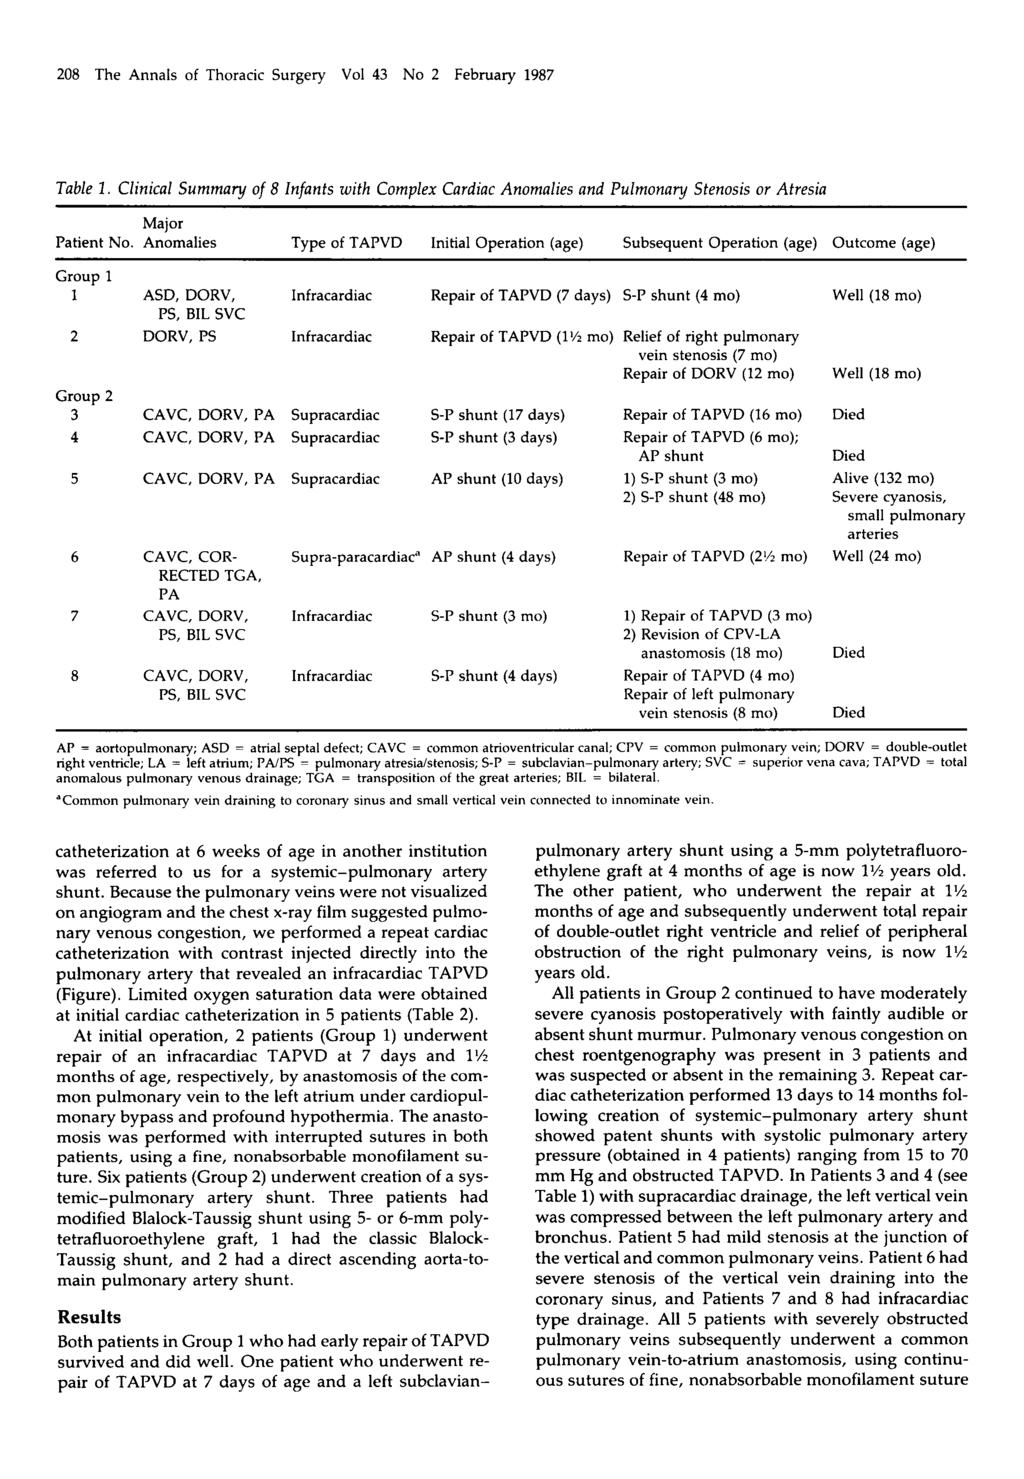 208 The Annals of Thoracic Surgery Vol 43 No 2 February 1987 Table 1. Clinical Summa y of 8 Infants with Complex Cardiac Anomalies and Pulmona y Stenosis or Atresia Major Patient No.